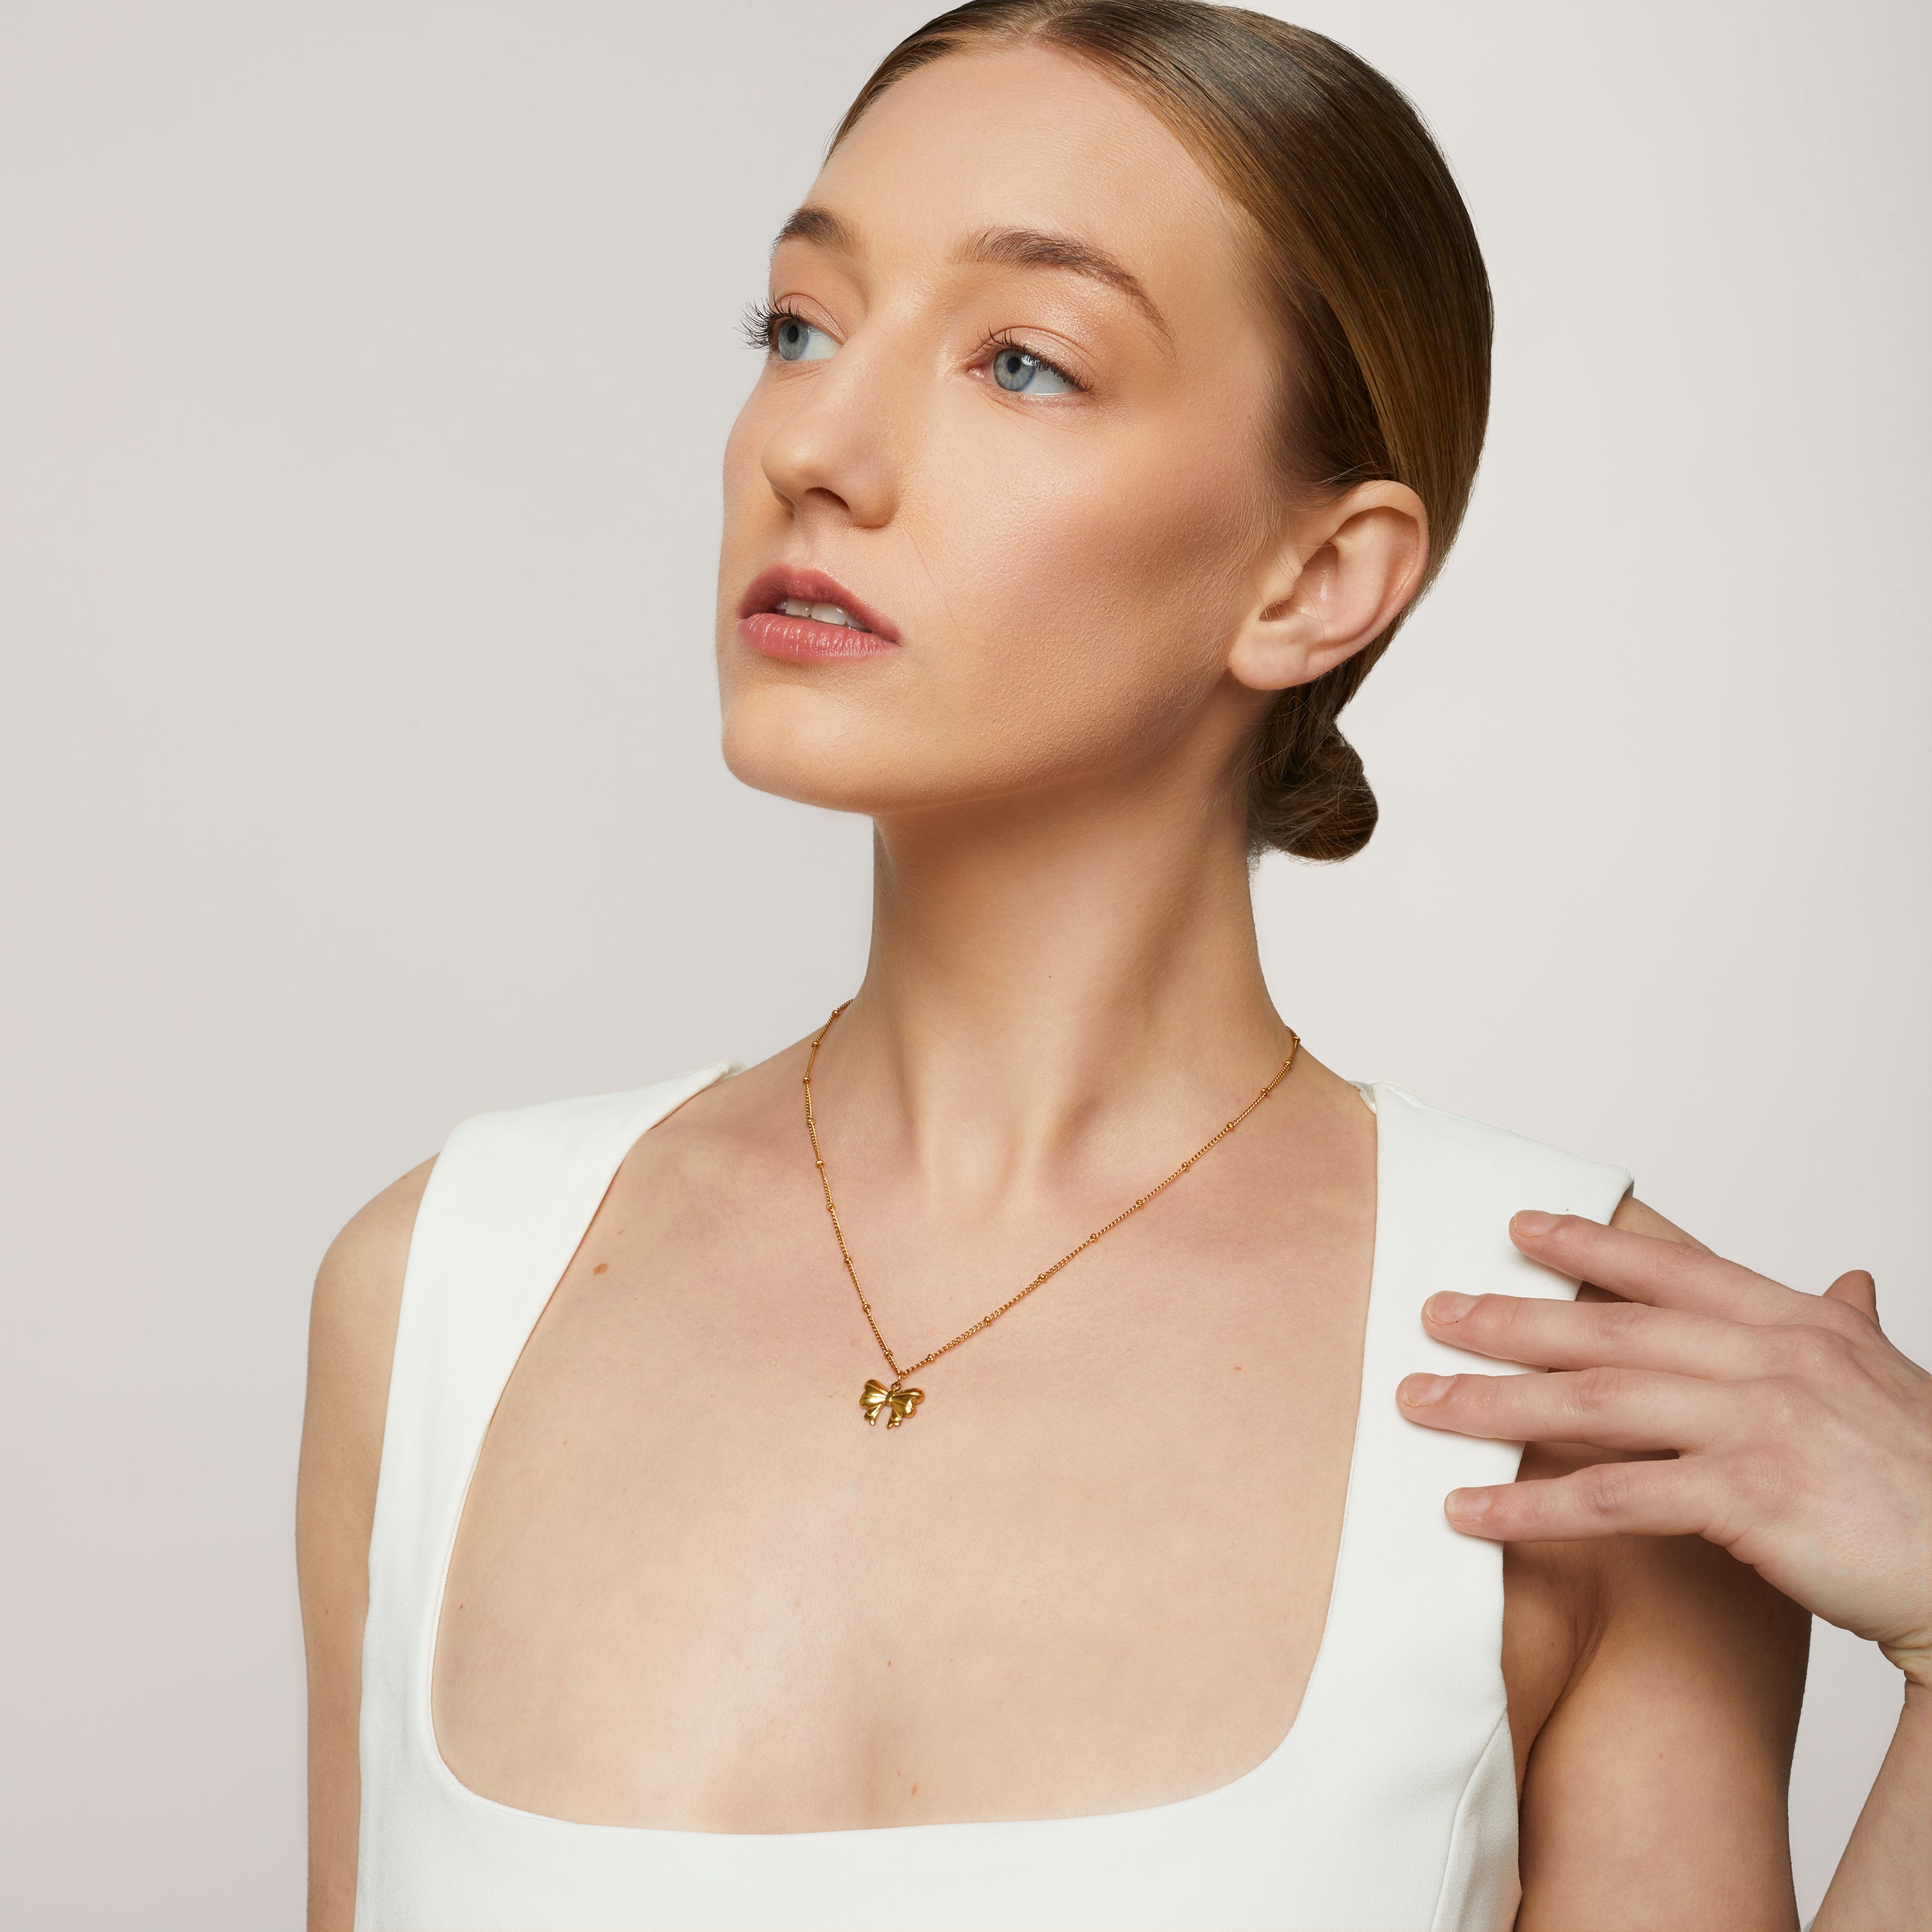 A model wearing the Wendy Necklace - the perfect combination of style and durability. This versatile accessory, made from non-tarnish 18K gold-plated stainless steel, is water-resistant and suitable for any occasion. With its adjustable design, it's the only necklace you'll ever need.